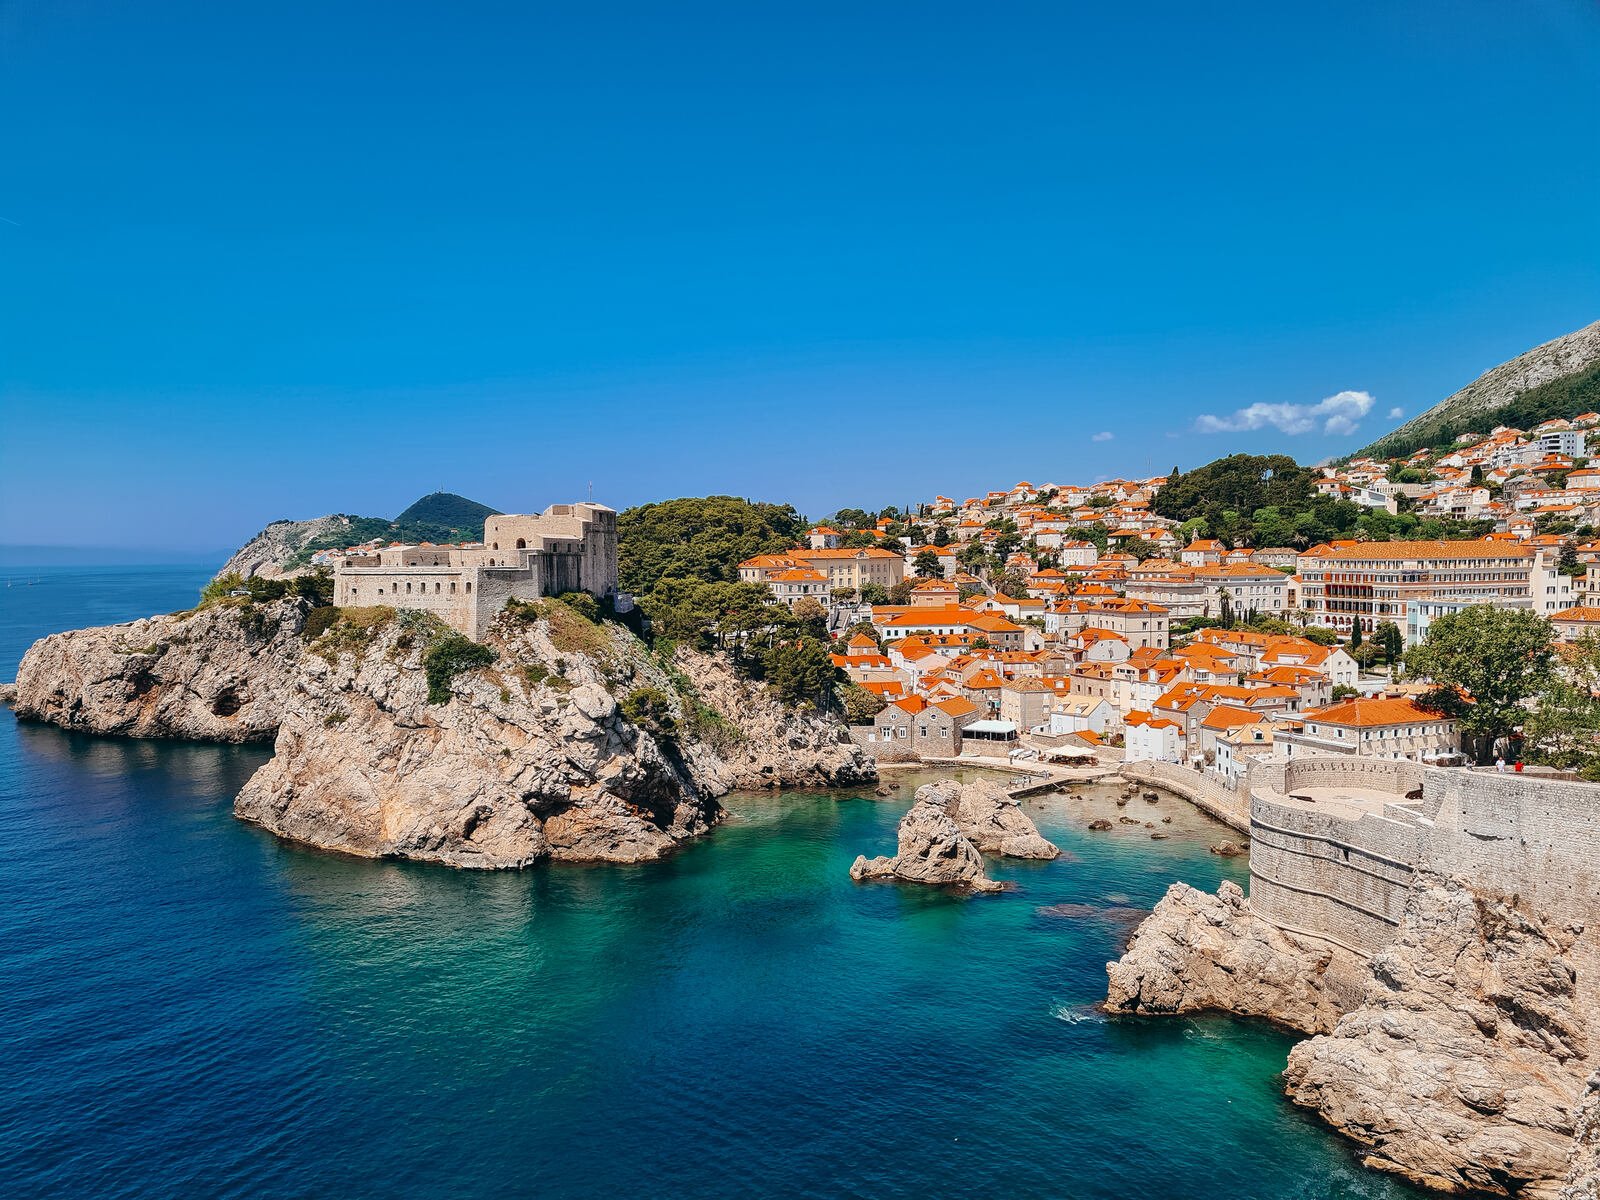 view looking across a bay and coastline in Dubrovnik with turquoise blue water, blue sky, a fortress on the rocky cliffs and terracotta rooftops in the background